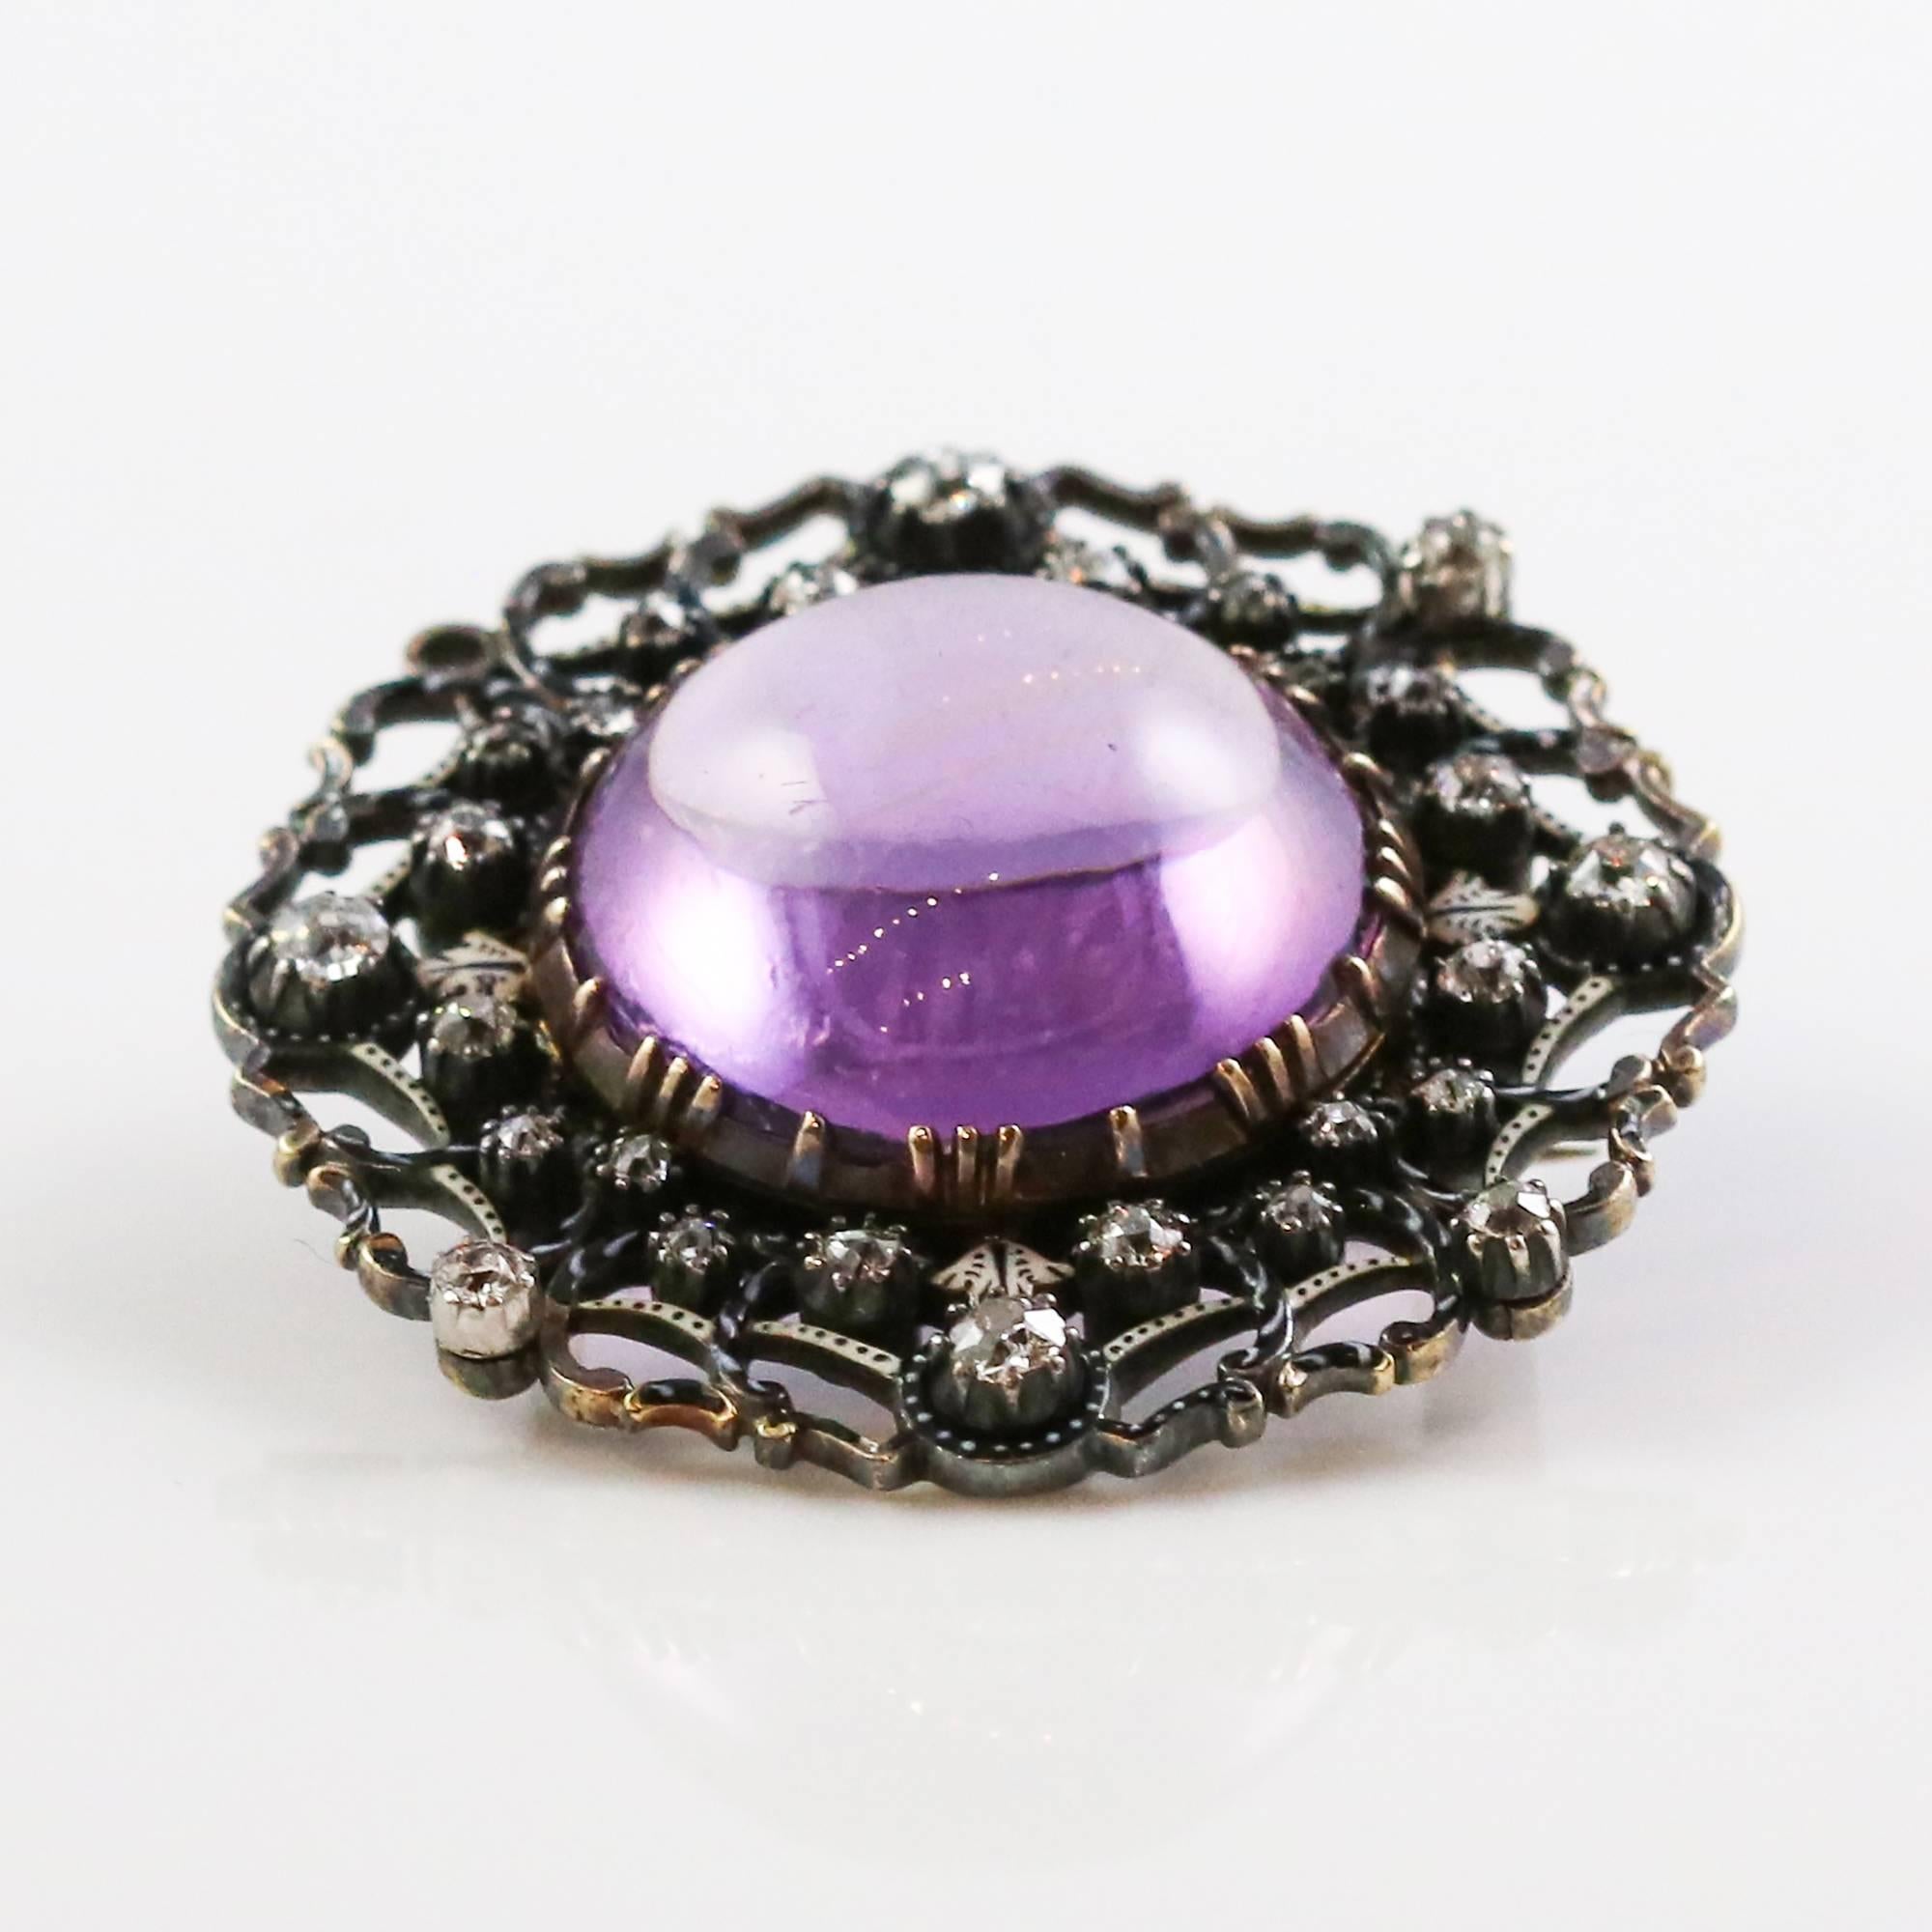 This stunning brooch is in remarkable condition considering it is over 200 years old. The center stone is a hypnotic 18mm cabochon cut amethyst set in 18k yellow gold with a sterling silver top. Much of the silver is heavily tarnished, which gives